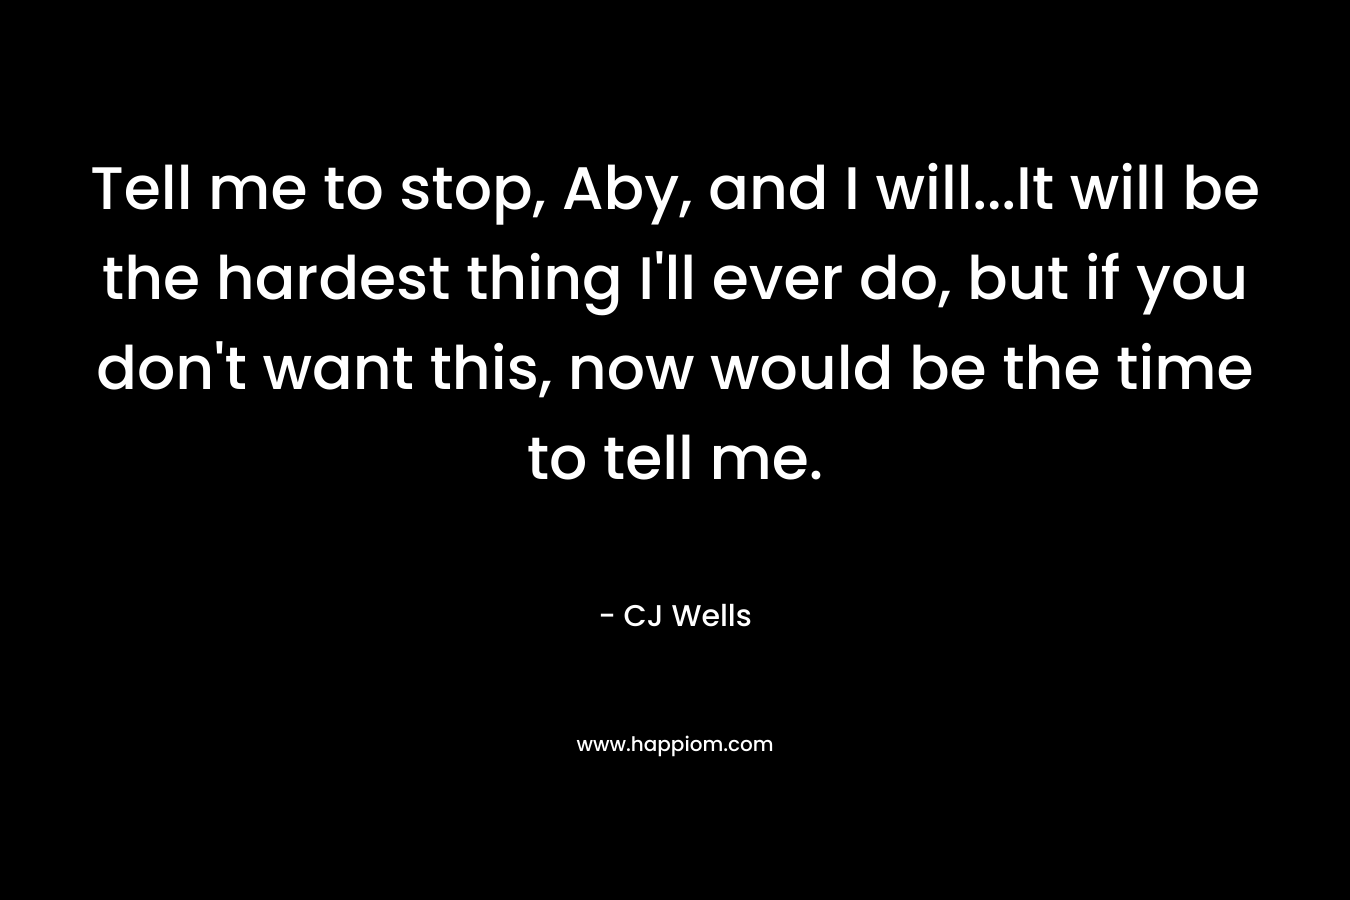 Tell me to stop, Aby, and I will...It will be the hardest thing I'll ever do, but if you don't want this, now would be the time to tell me.